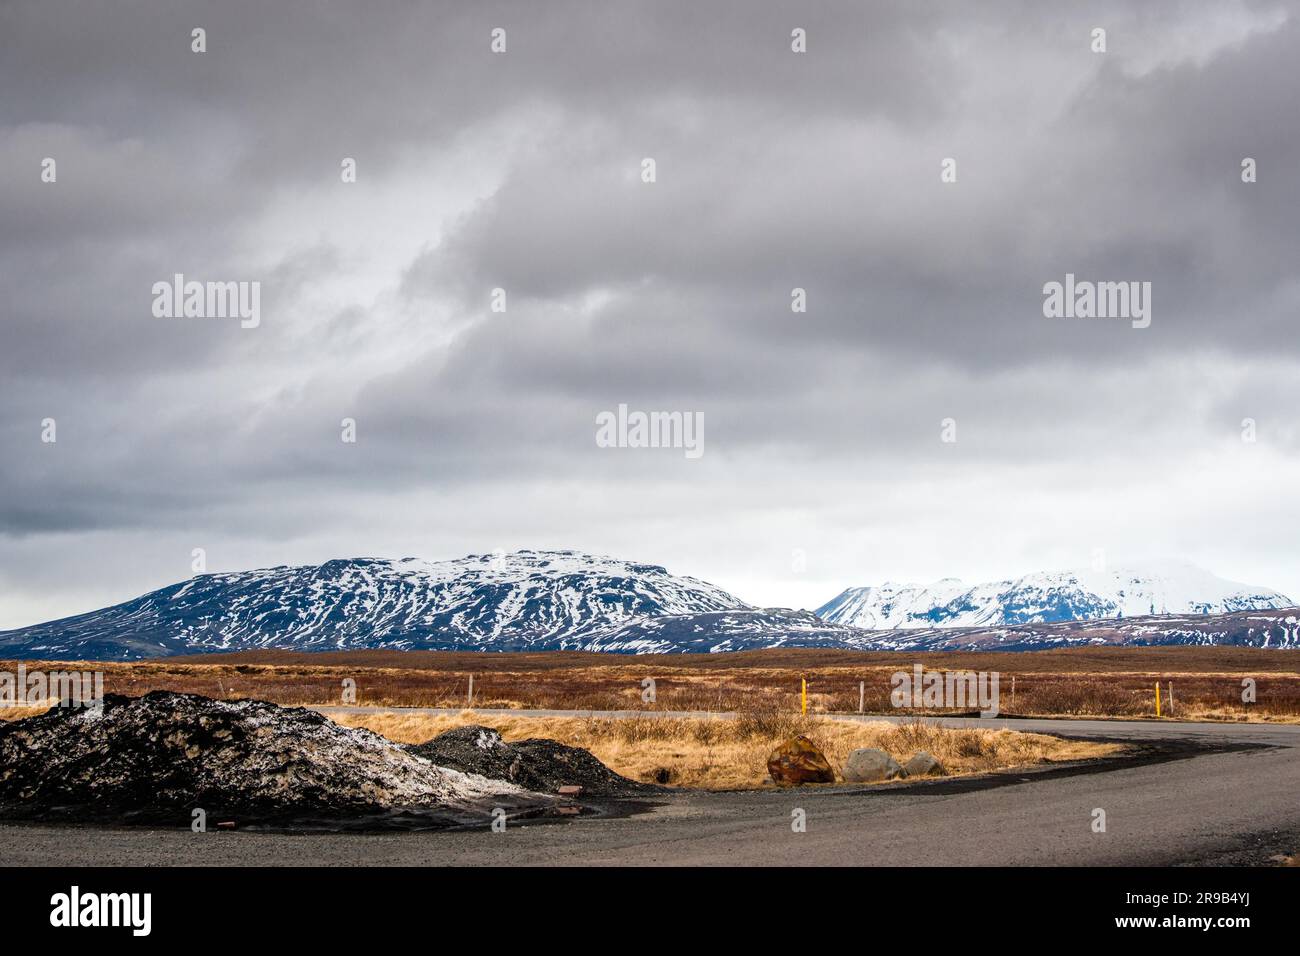 Cloudy weather by a road in dramatic landscape Stock Photo